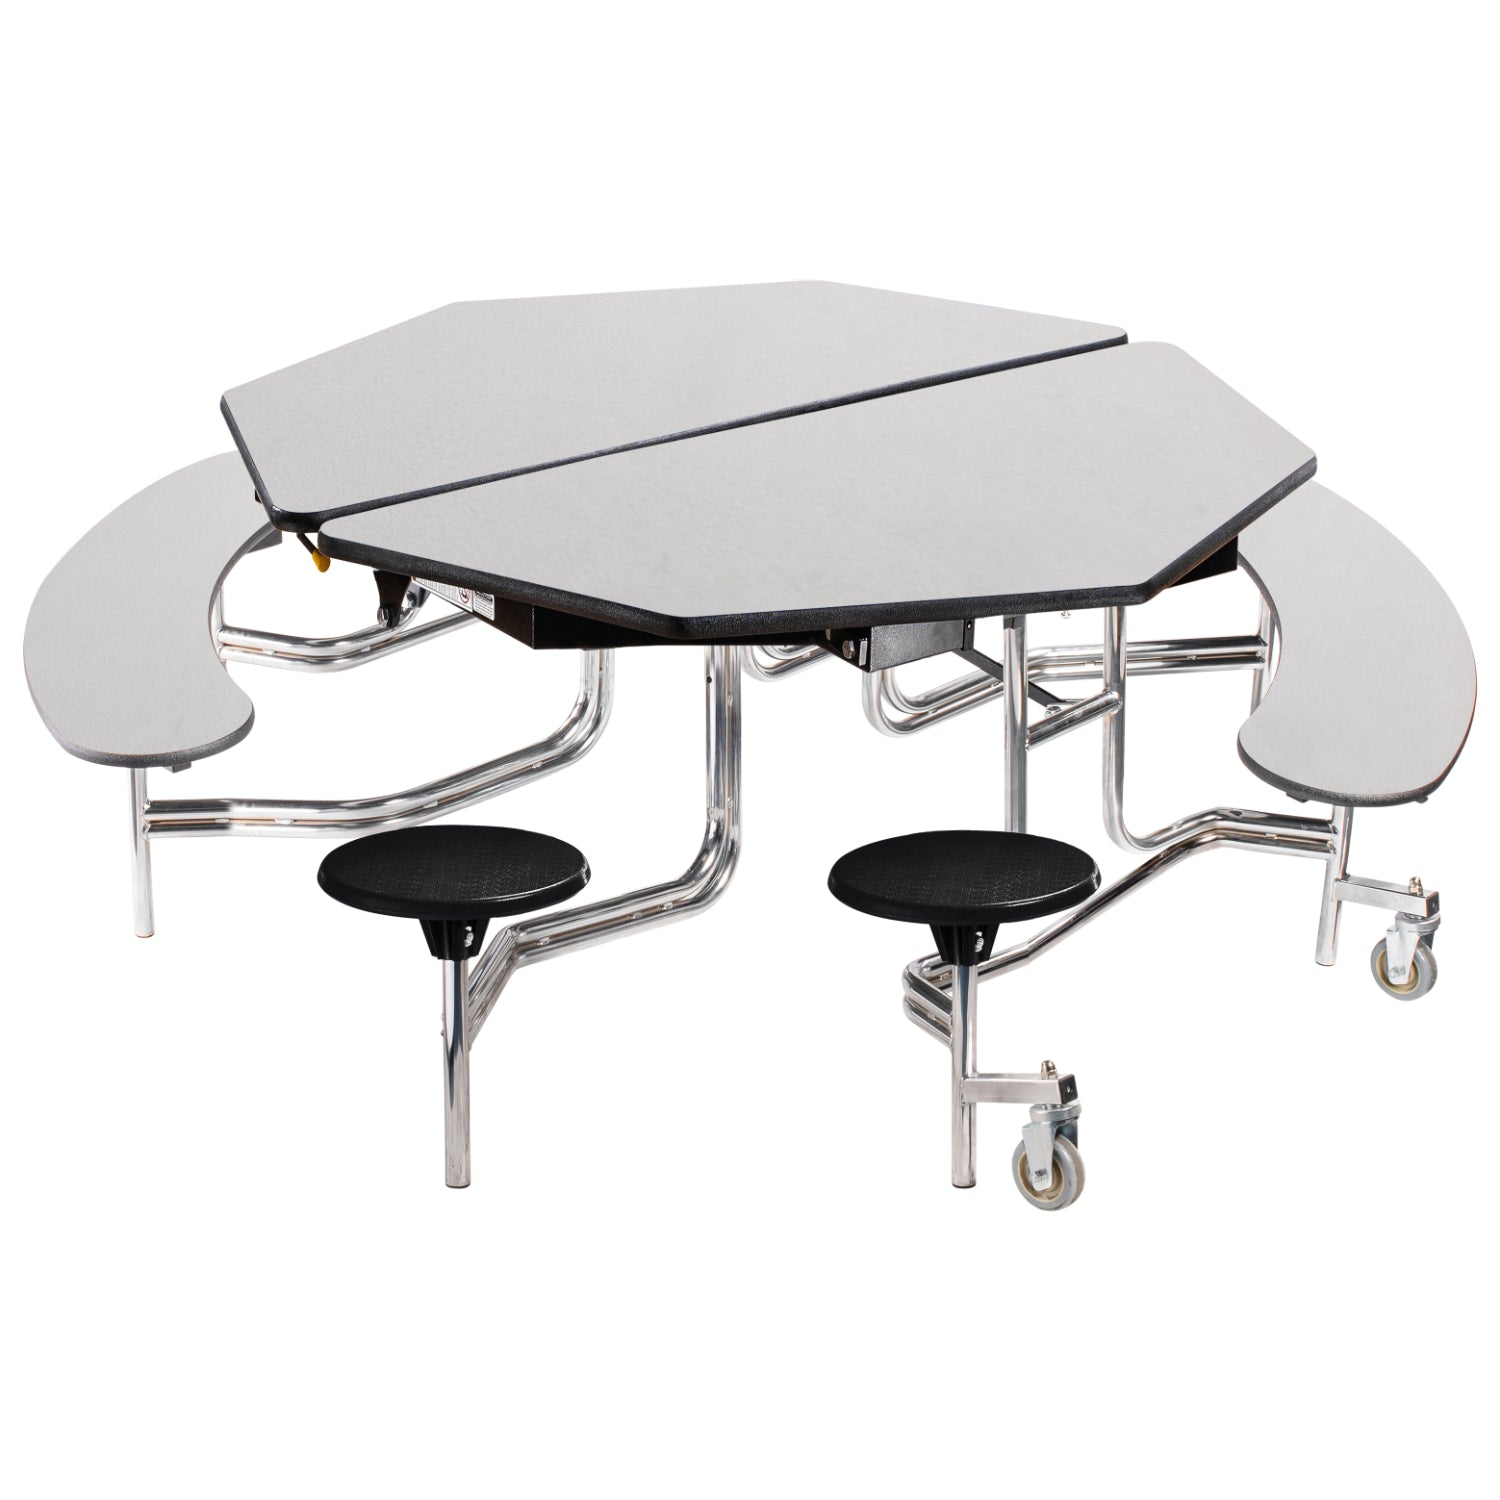 Mobile Combo Cafeteria Table, 60" Octagon with Stools and Benches, Plywood Core, Vinyl T-Mold Edge, Chrome Frame